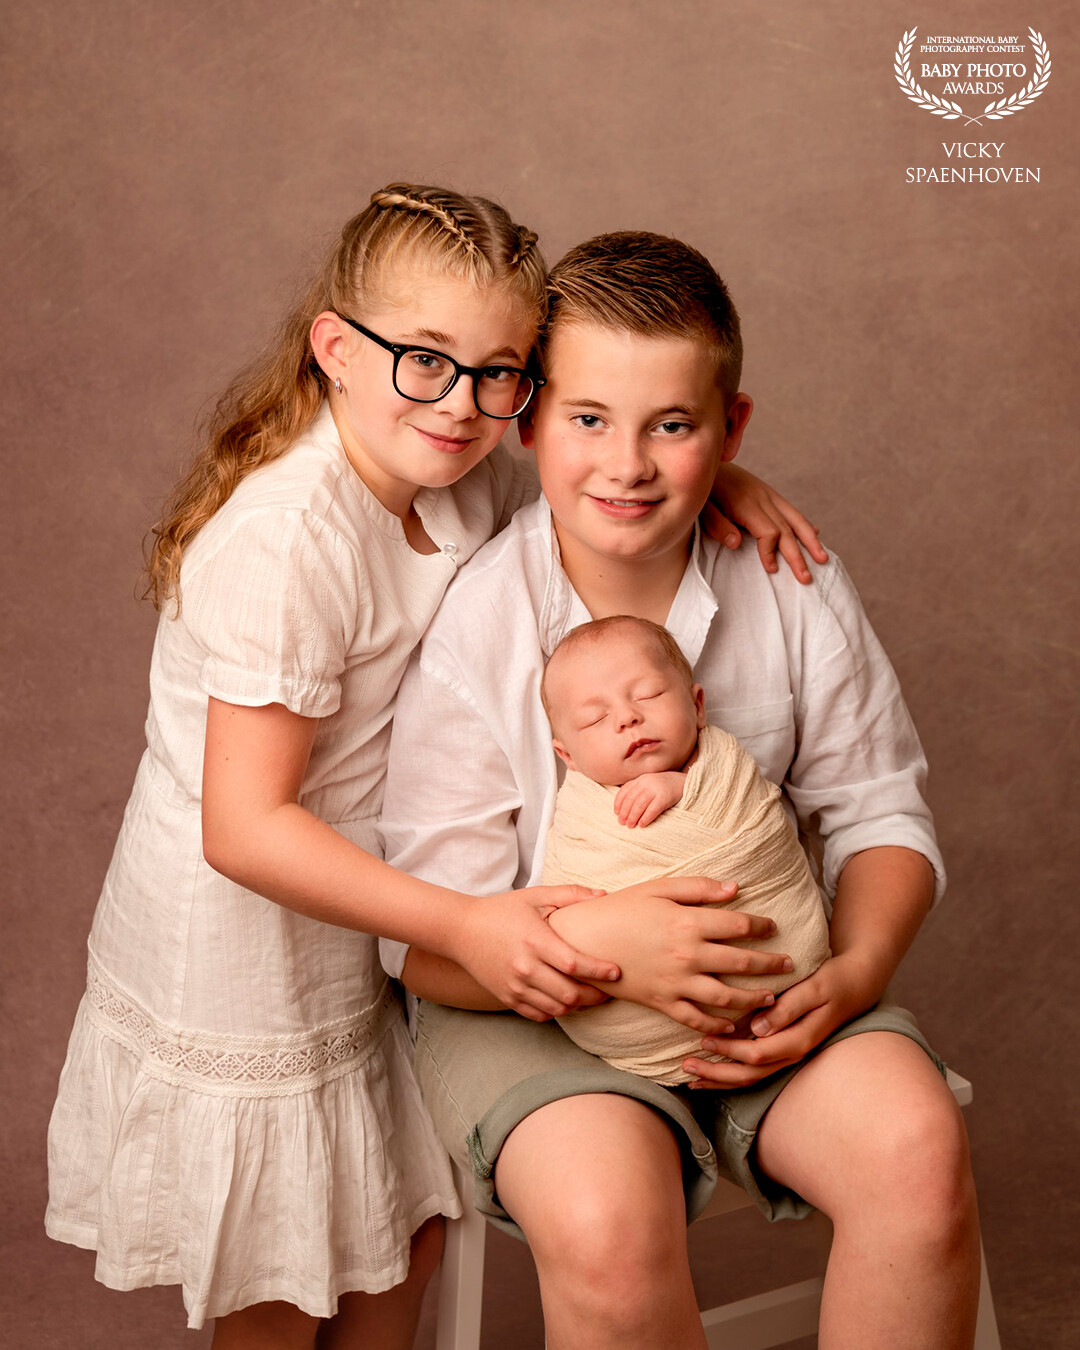 The love between brothers and sister. I love the connection between them and the warm color tones.